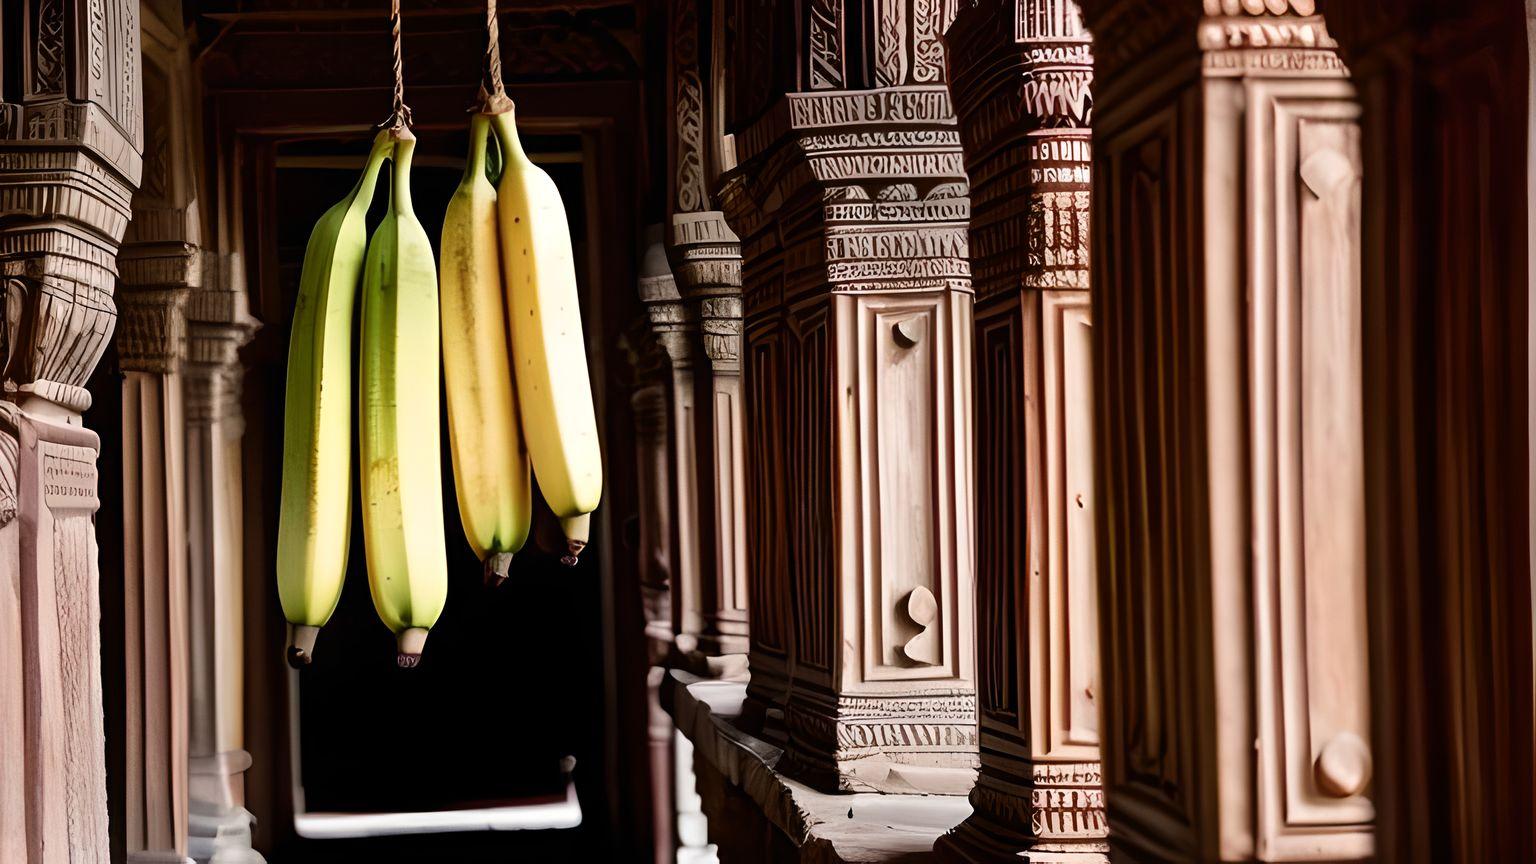 Disabled Muslim Man Lynched Allegedly Over ‘Banana’ at Hindu Temple Event In India